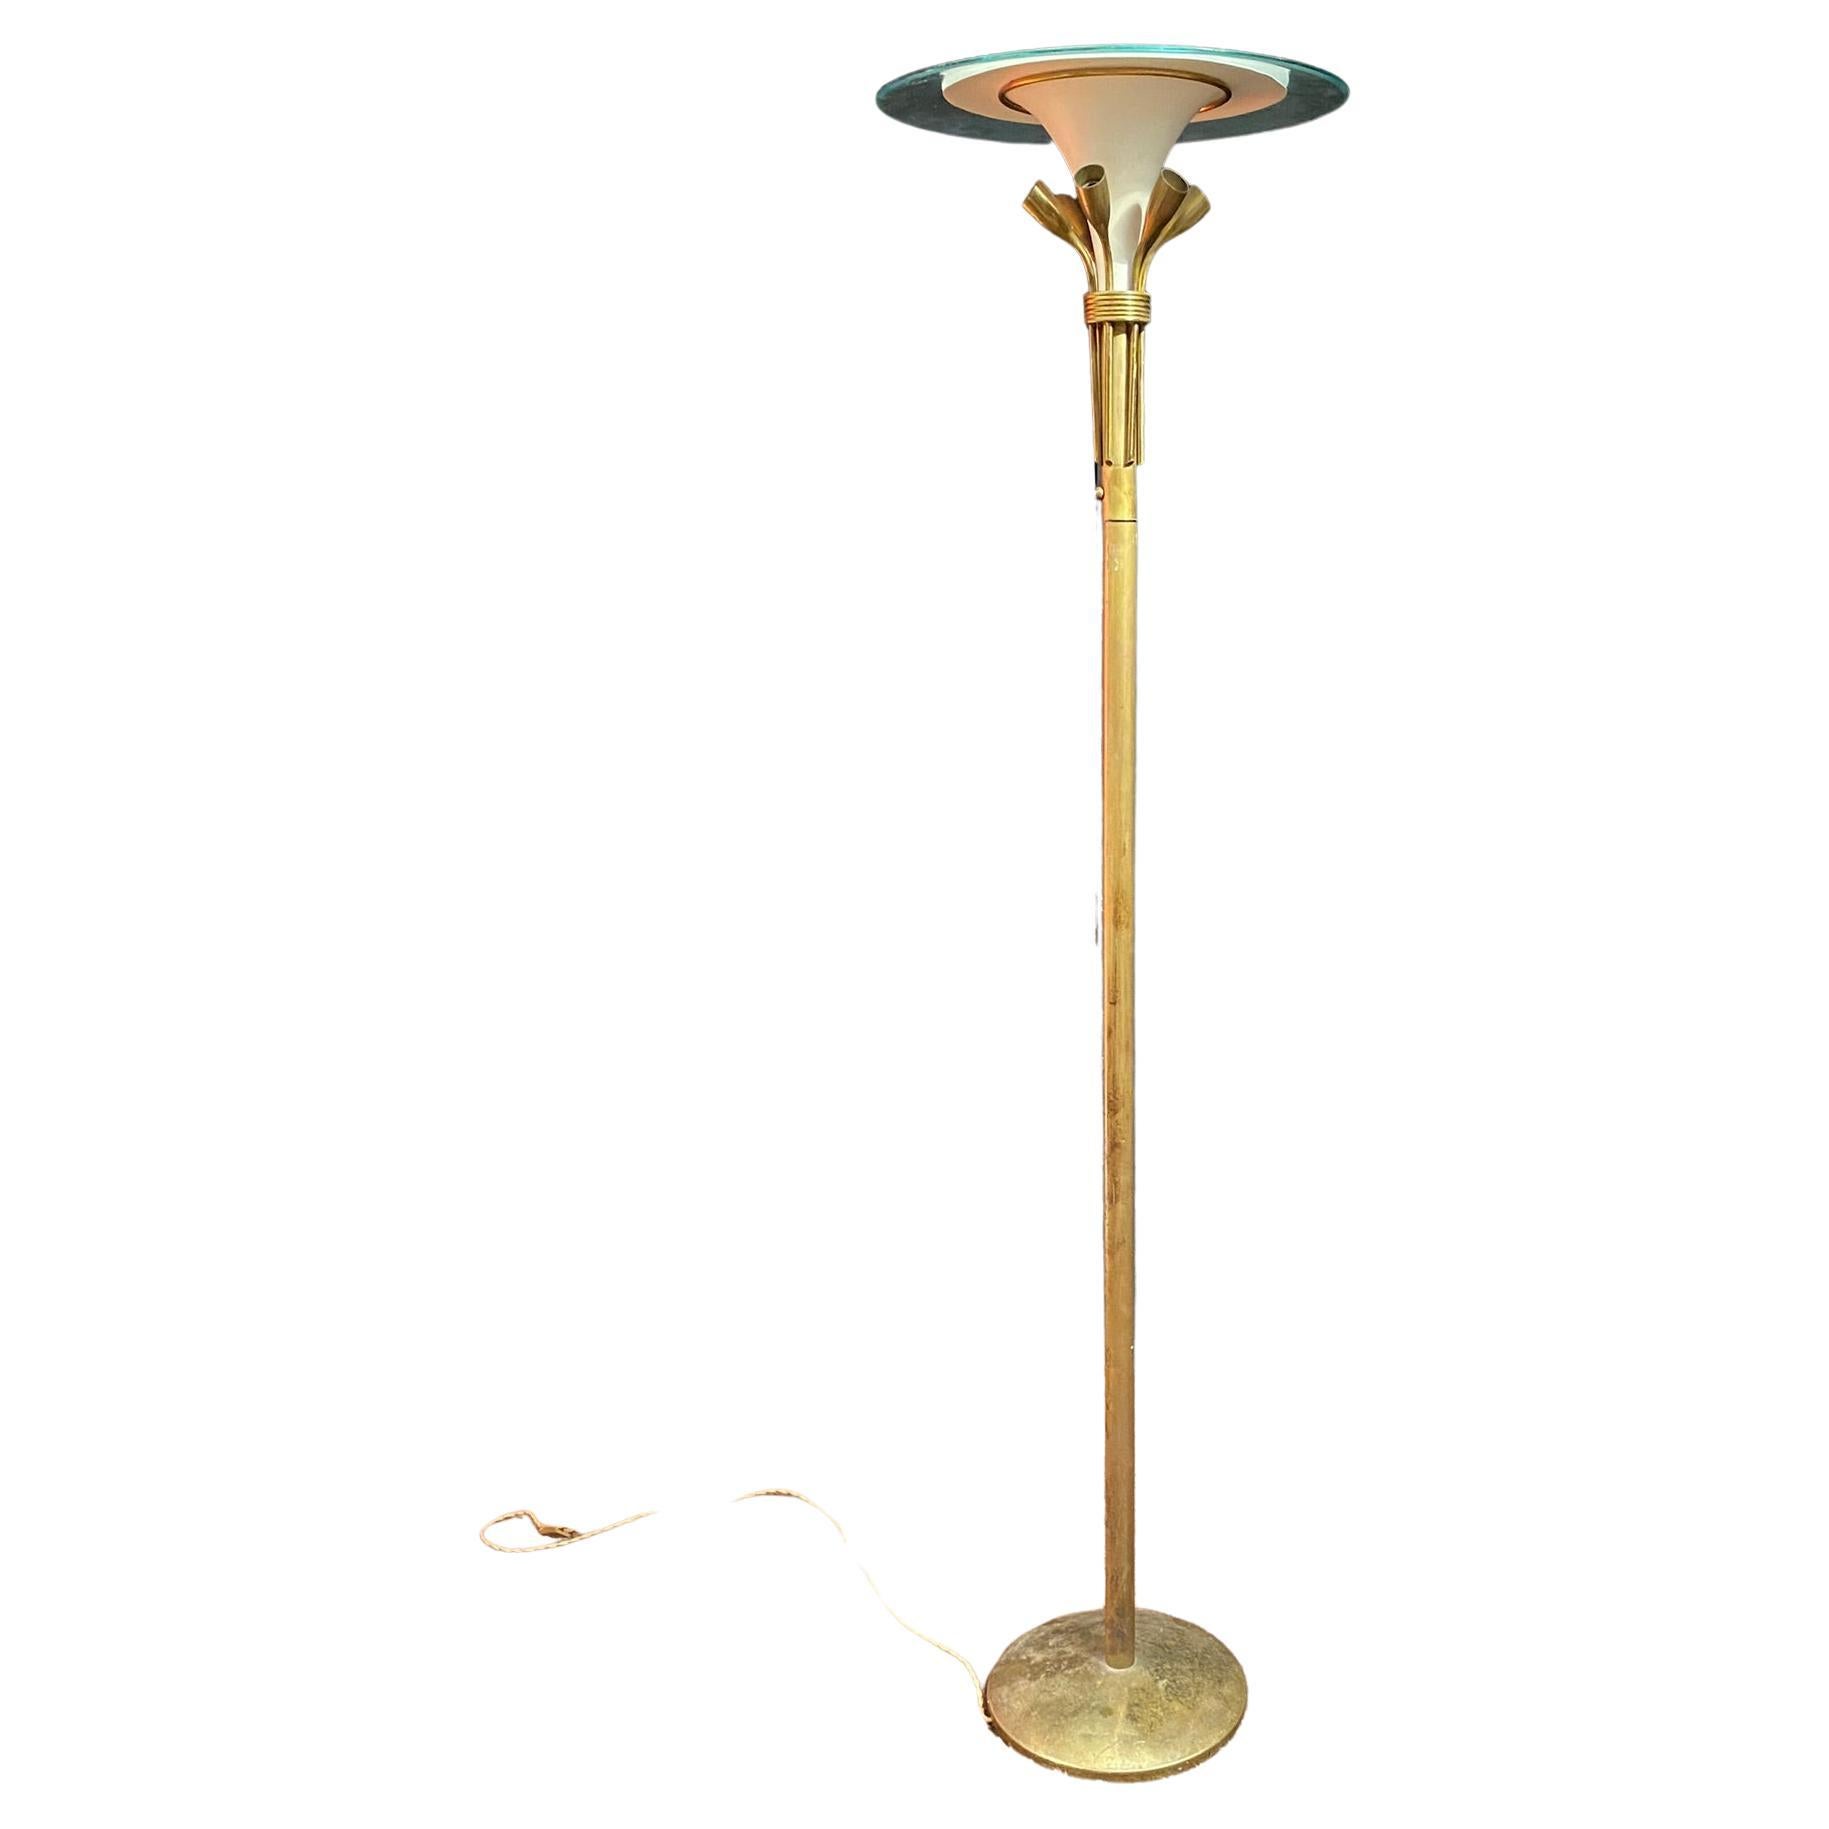 Italian Floor Lamp in Lacquered Metal, Brass, and Glass, circa 1950